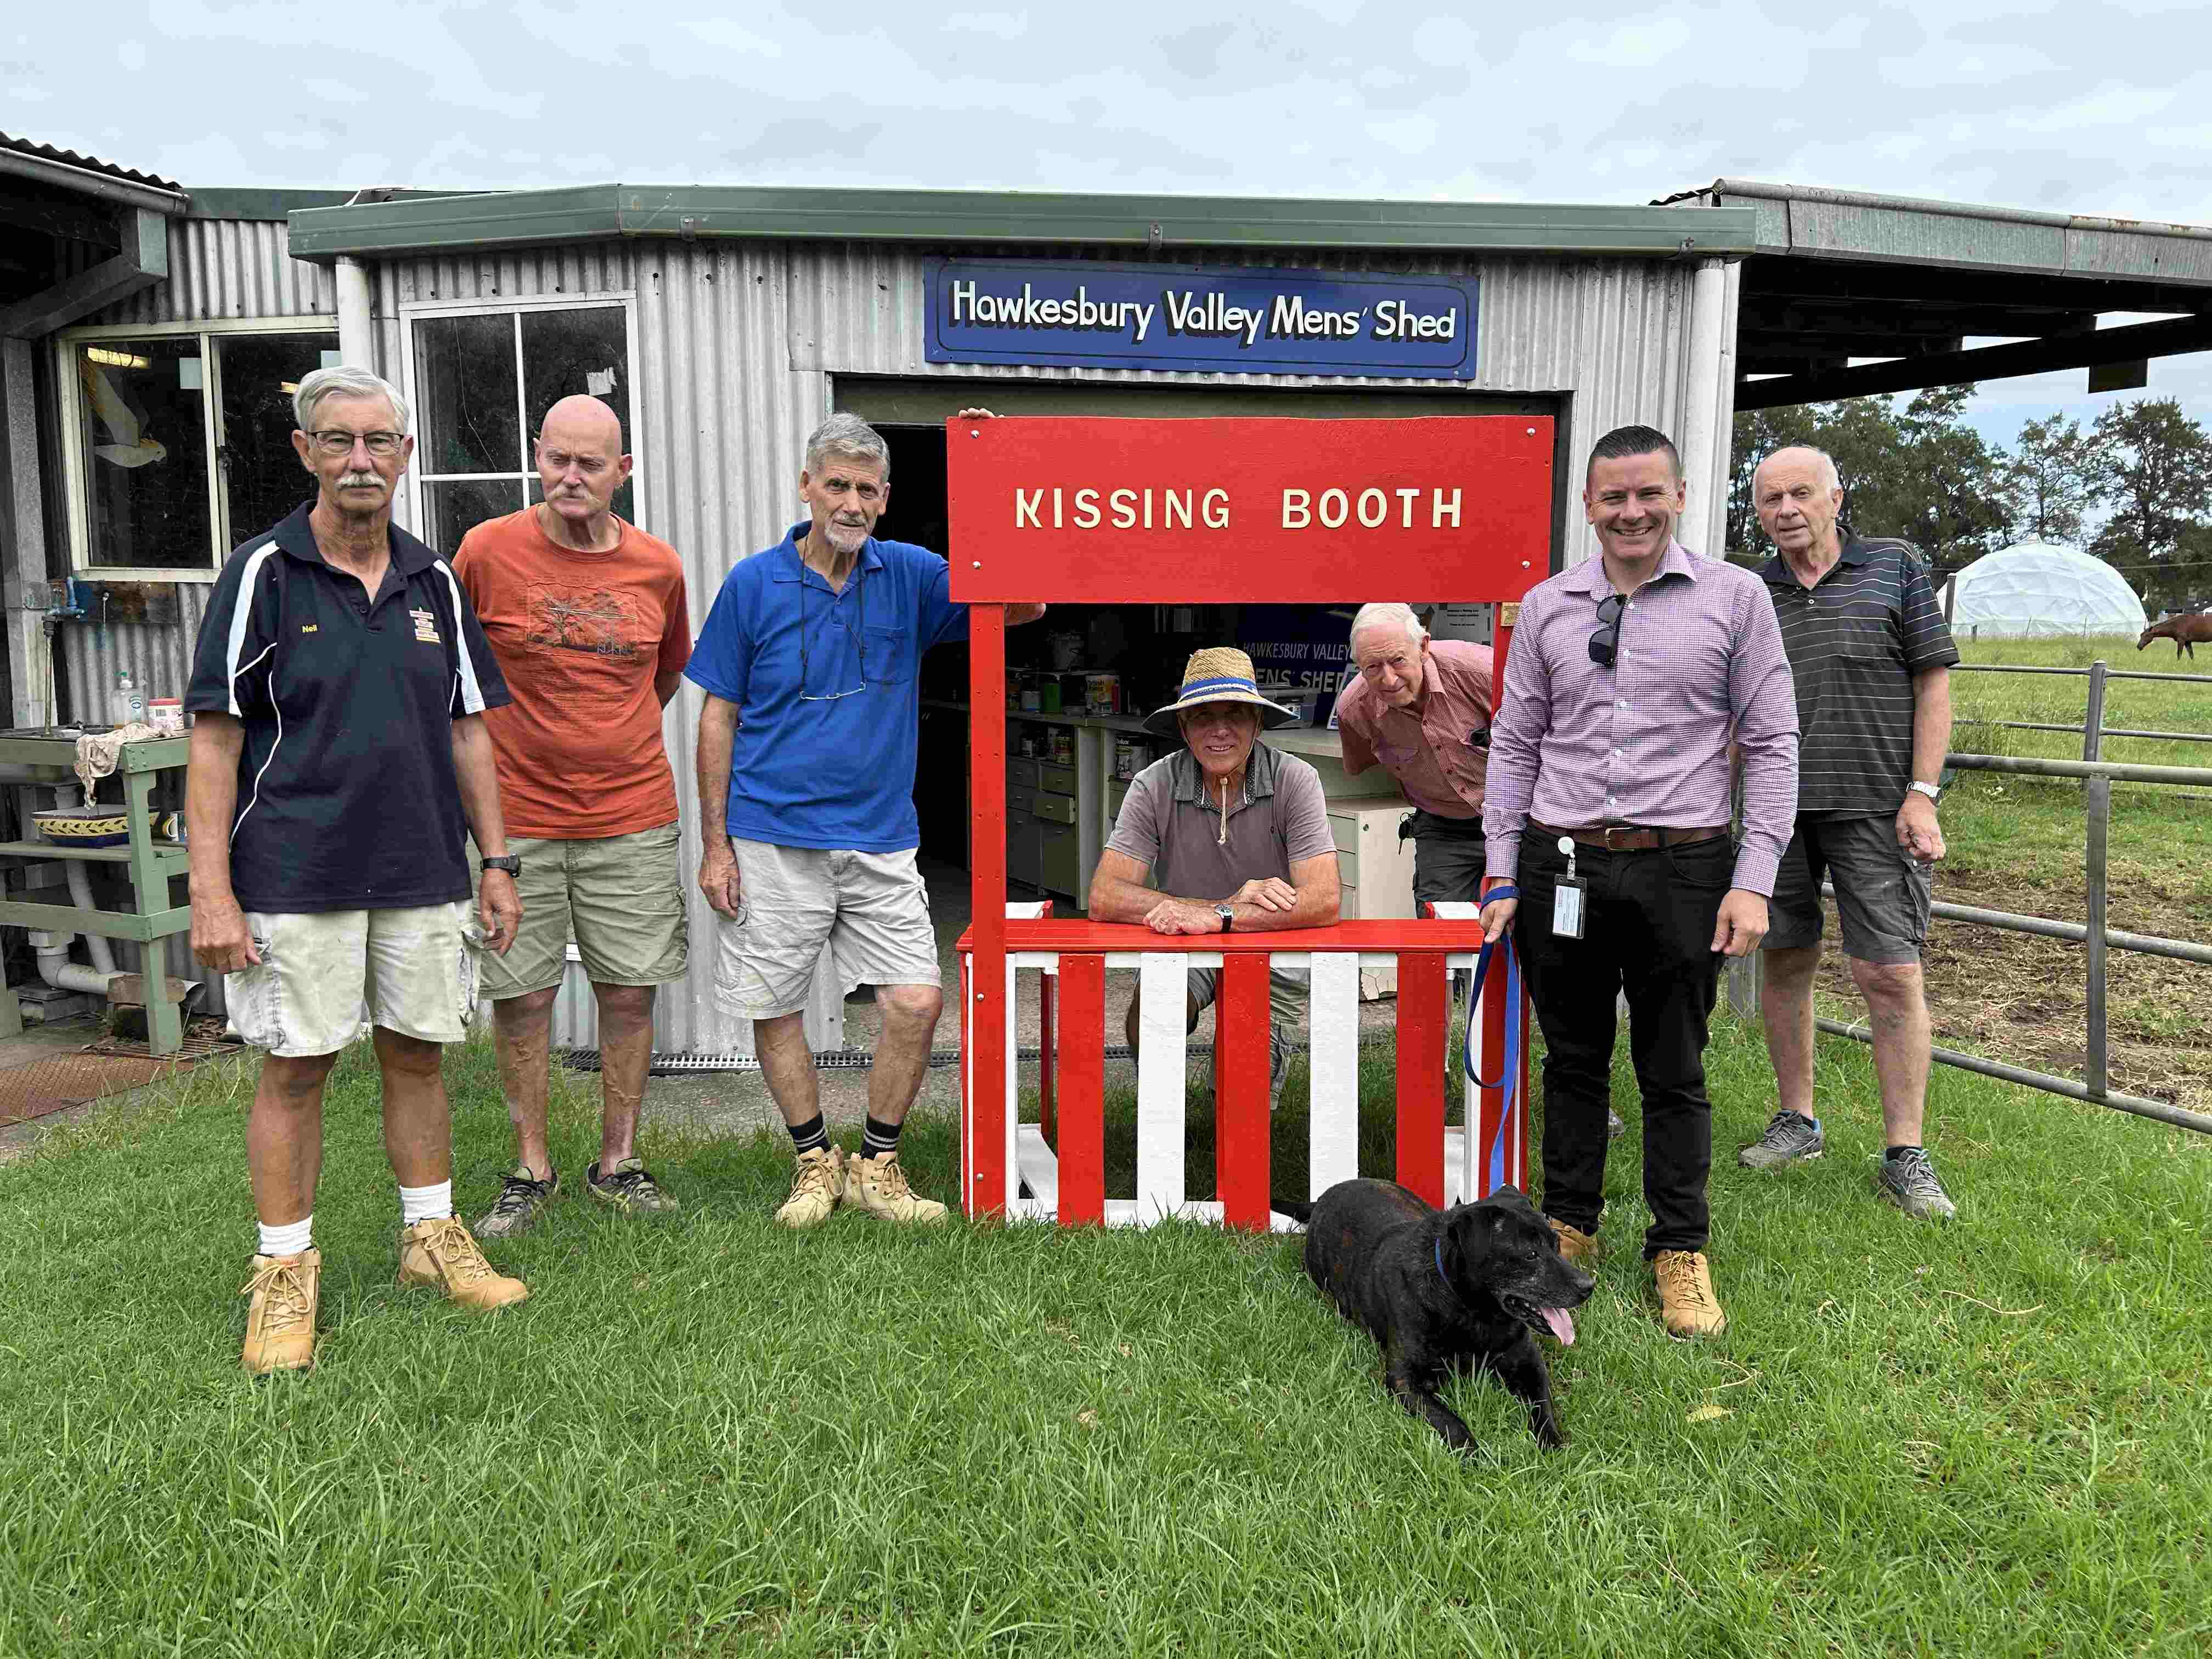 Animal Shelter - Kissing Booth - Men's Shed volunteers and Rob Wainhouse